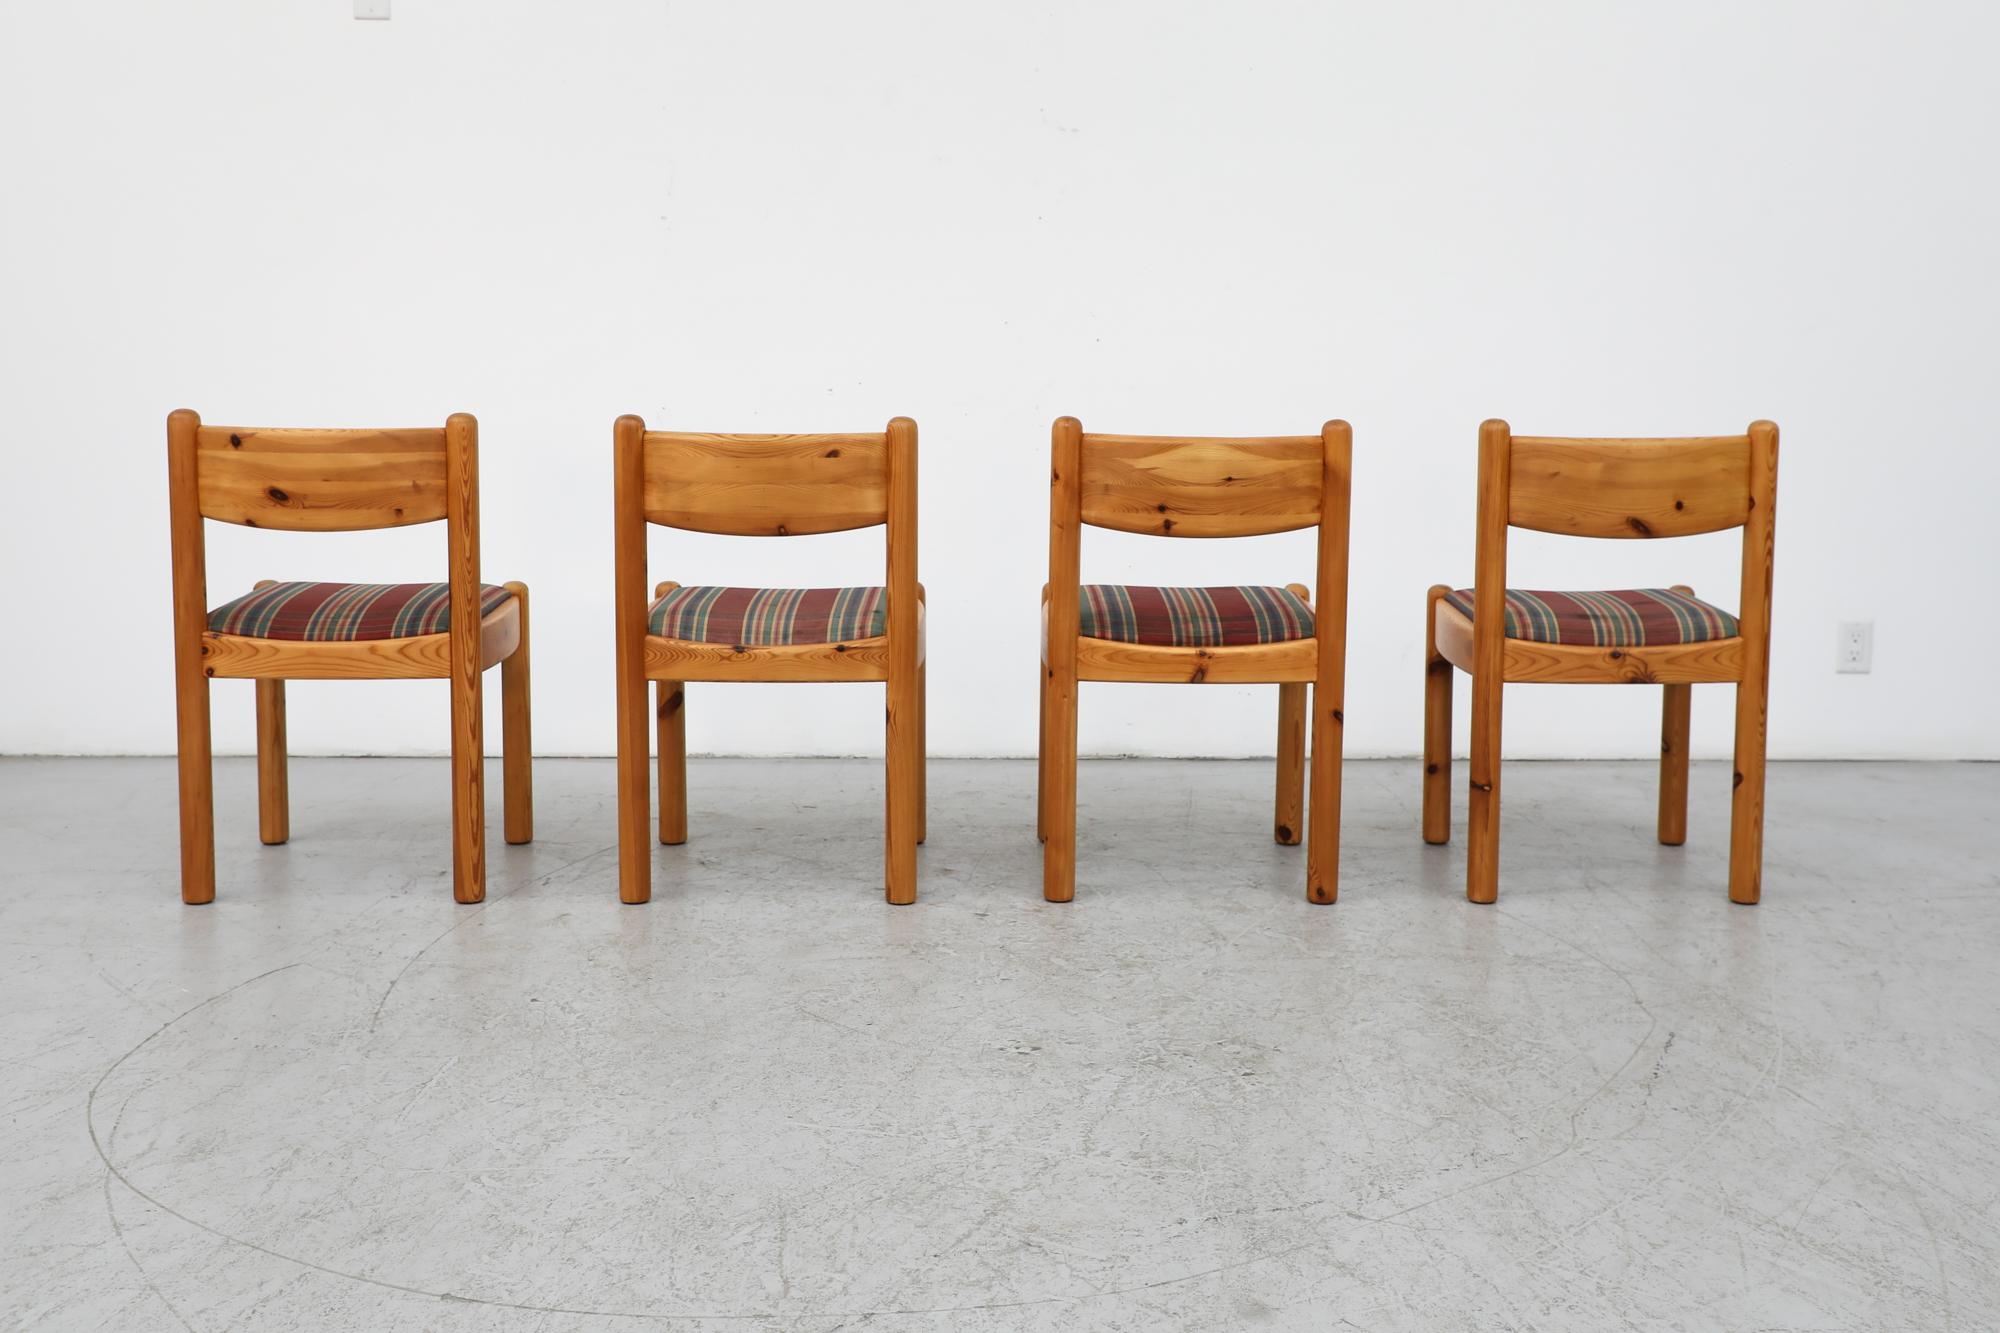 Mid-20th Century Set of 4 Ate van Apeldoorn Style Pine Dining Chairs w/ Round Legs & Plaid Seats For Sale